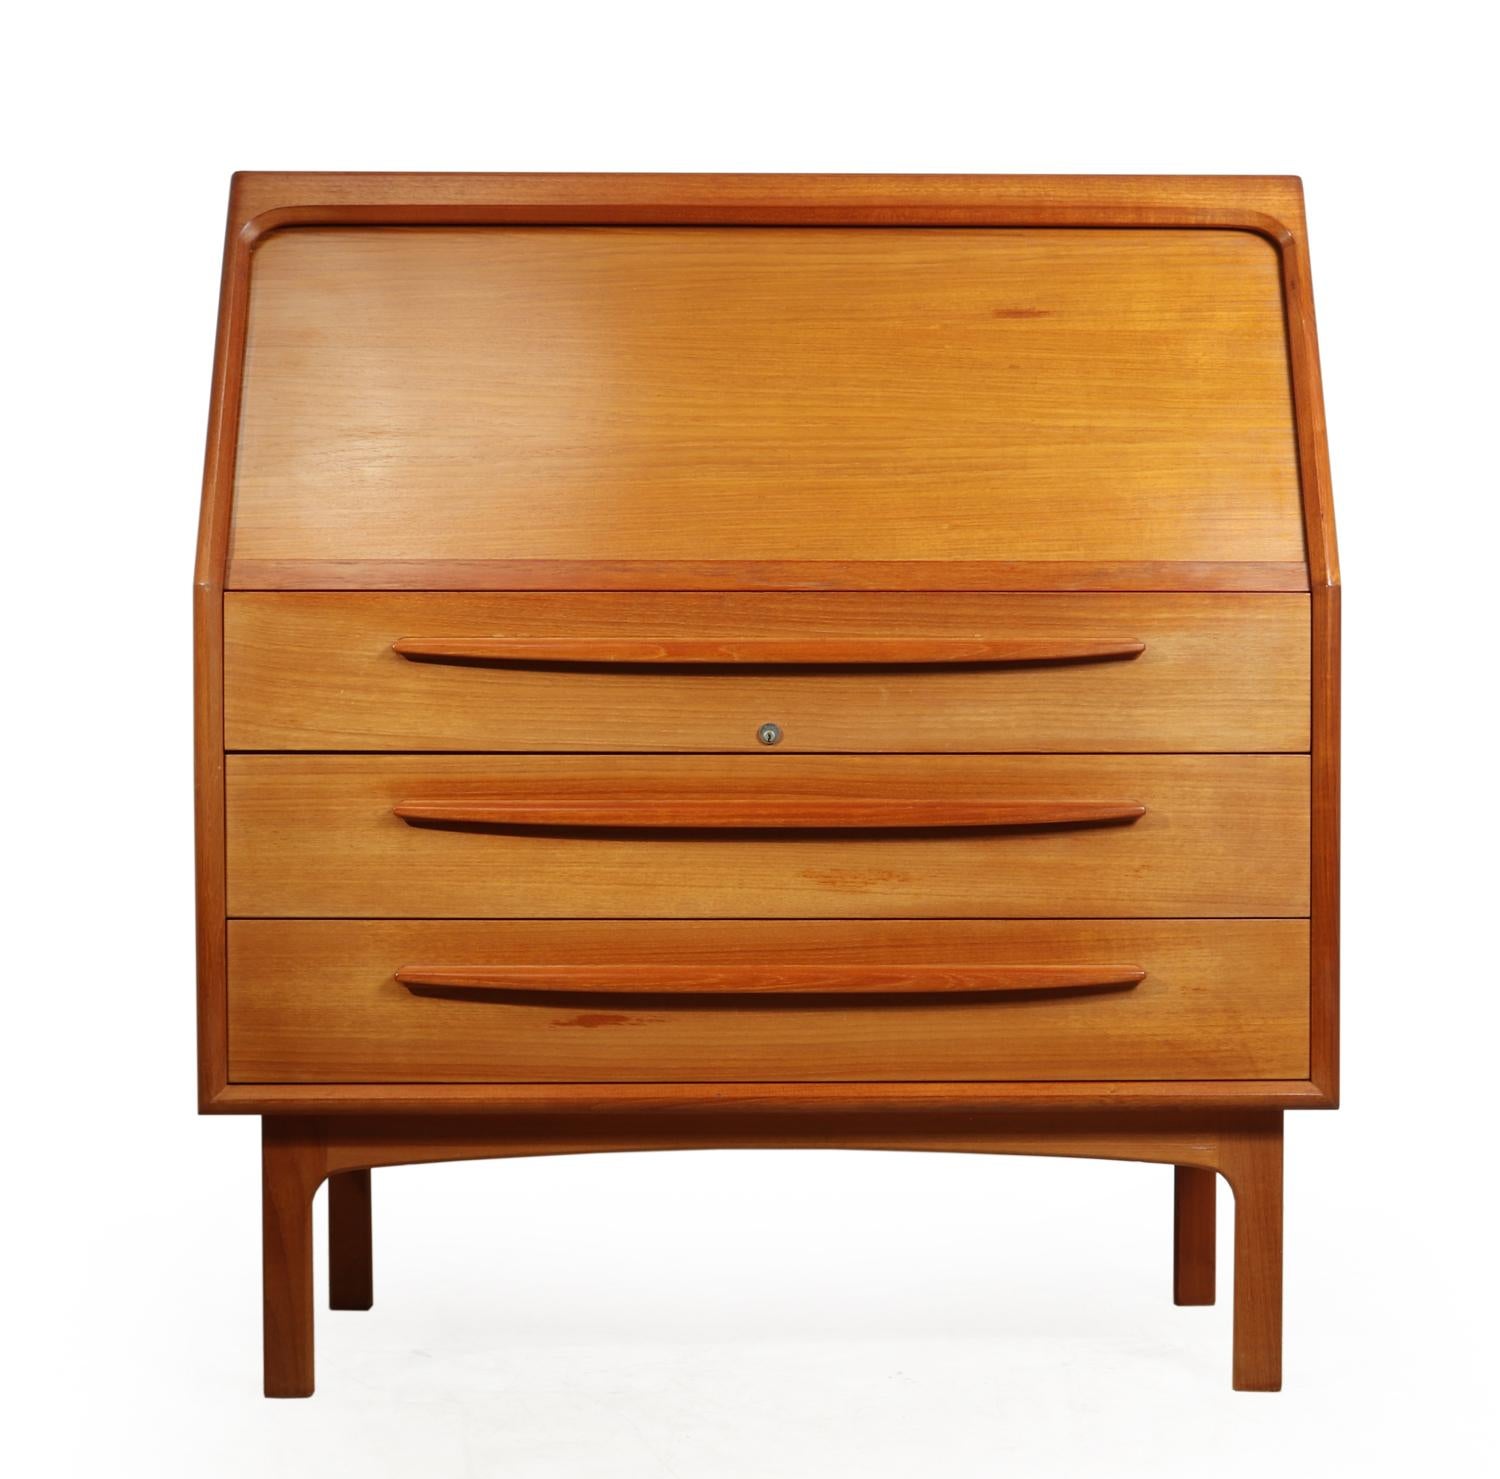 Midcentury Danish Teak Tambour Door Bureau, circa 1960
This Danish original 1960s, midcentury Teak Bureau has a tambour door top section with automatic opening on pulling the door. It has finger jointed drawer and a sliding divider. It is in Very